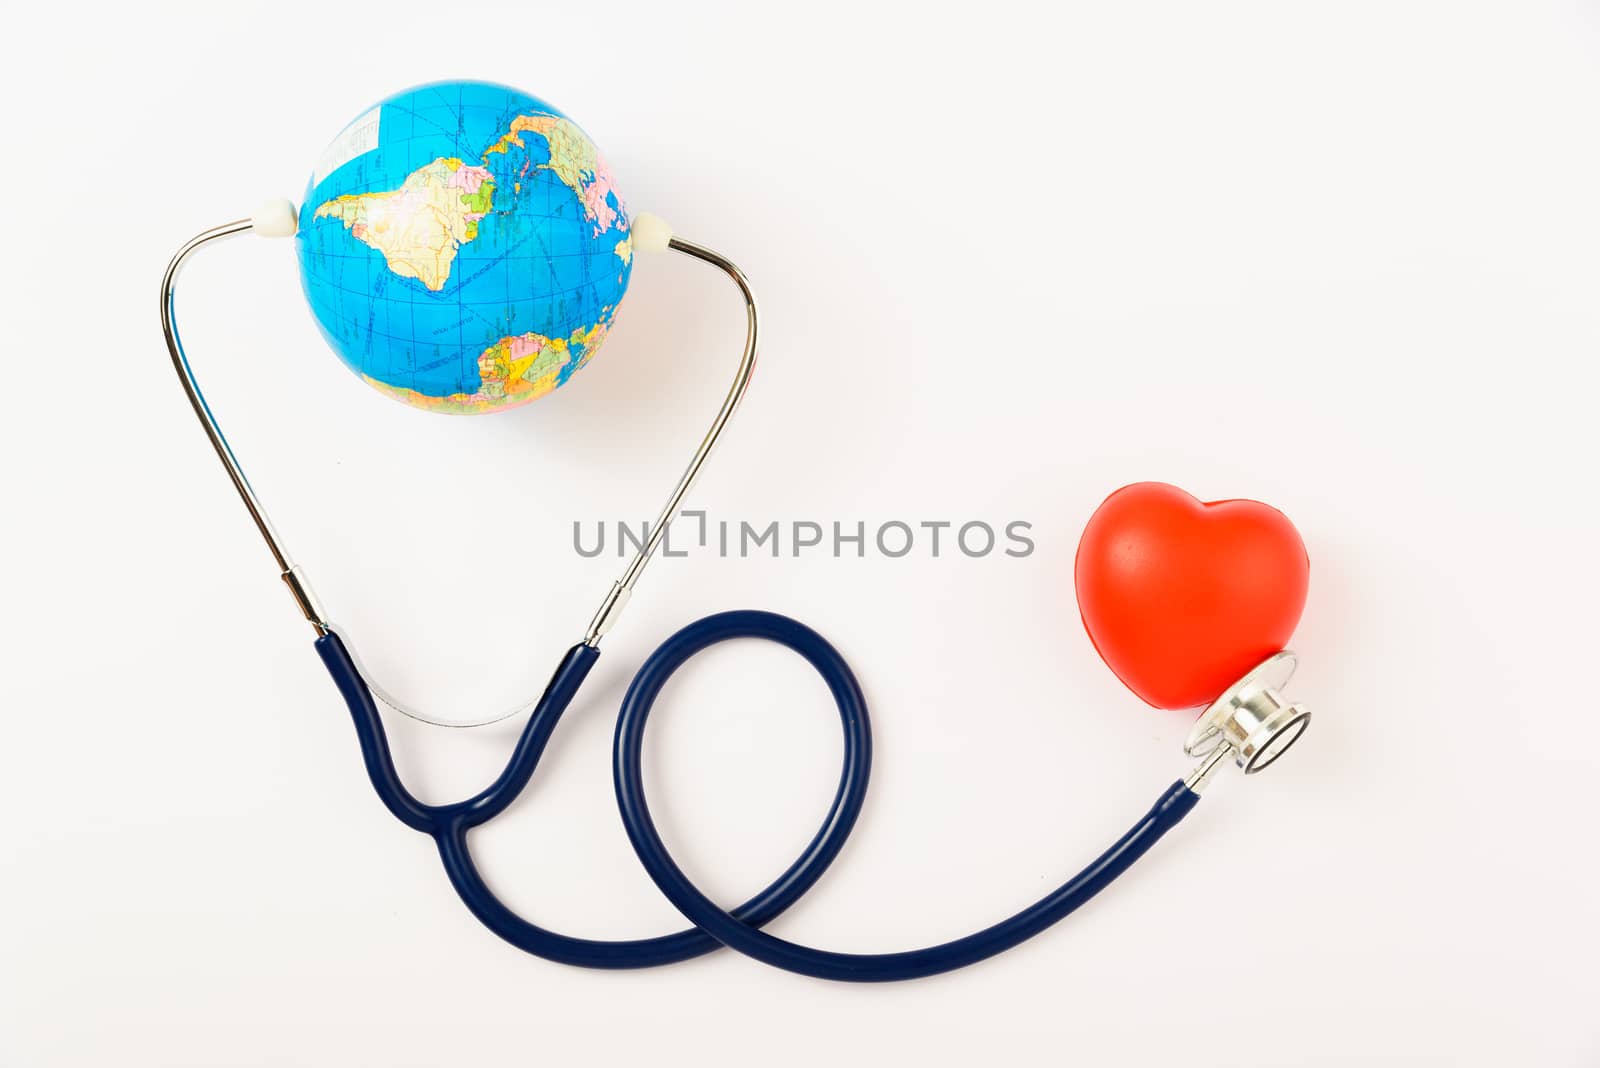 World health day concept, Stethoscope, globe and red heart on white background with copy space. Global health care